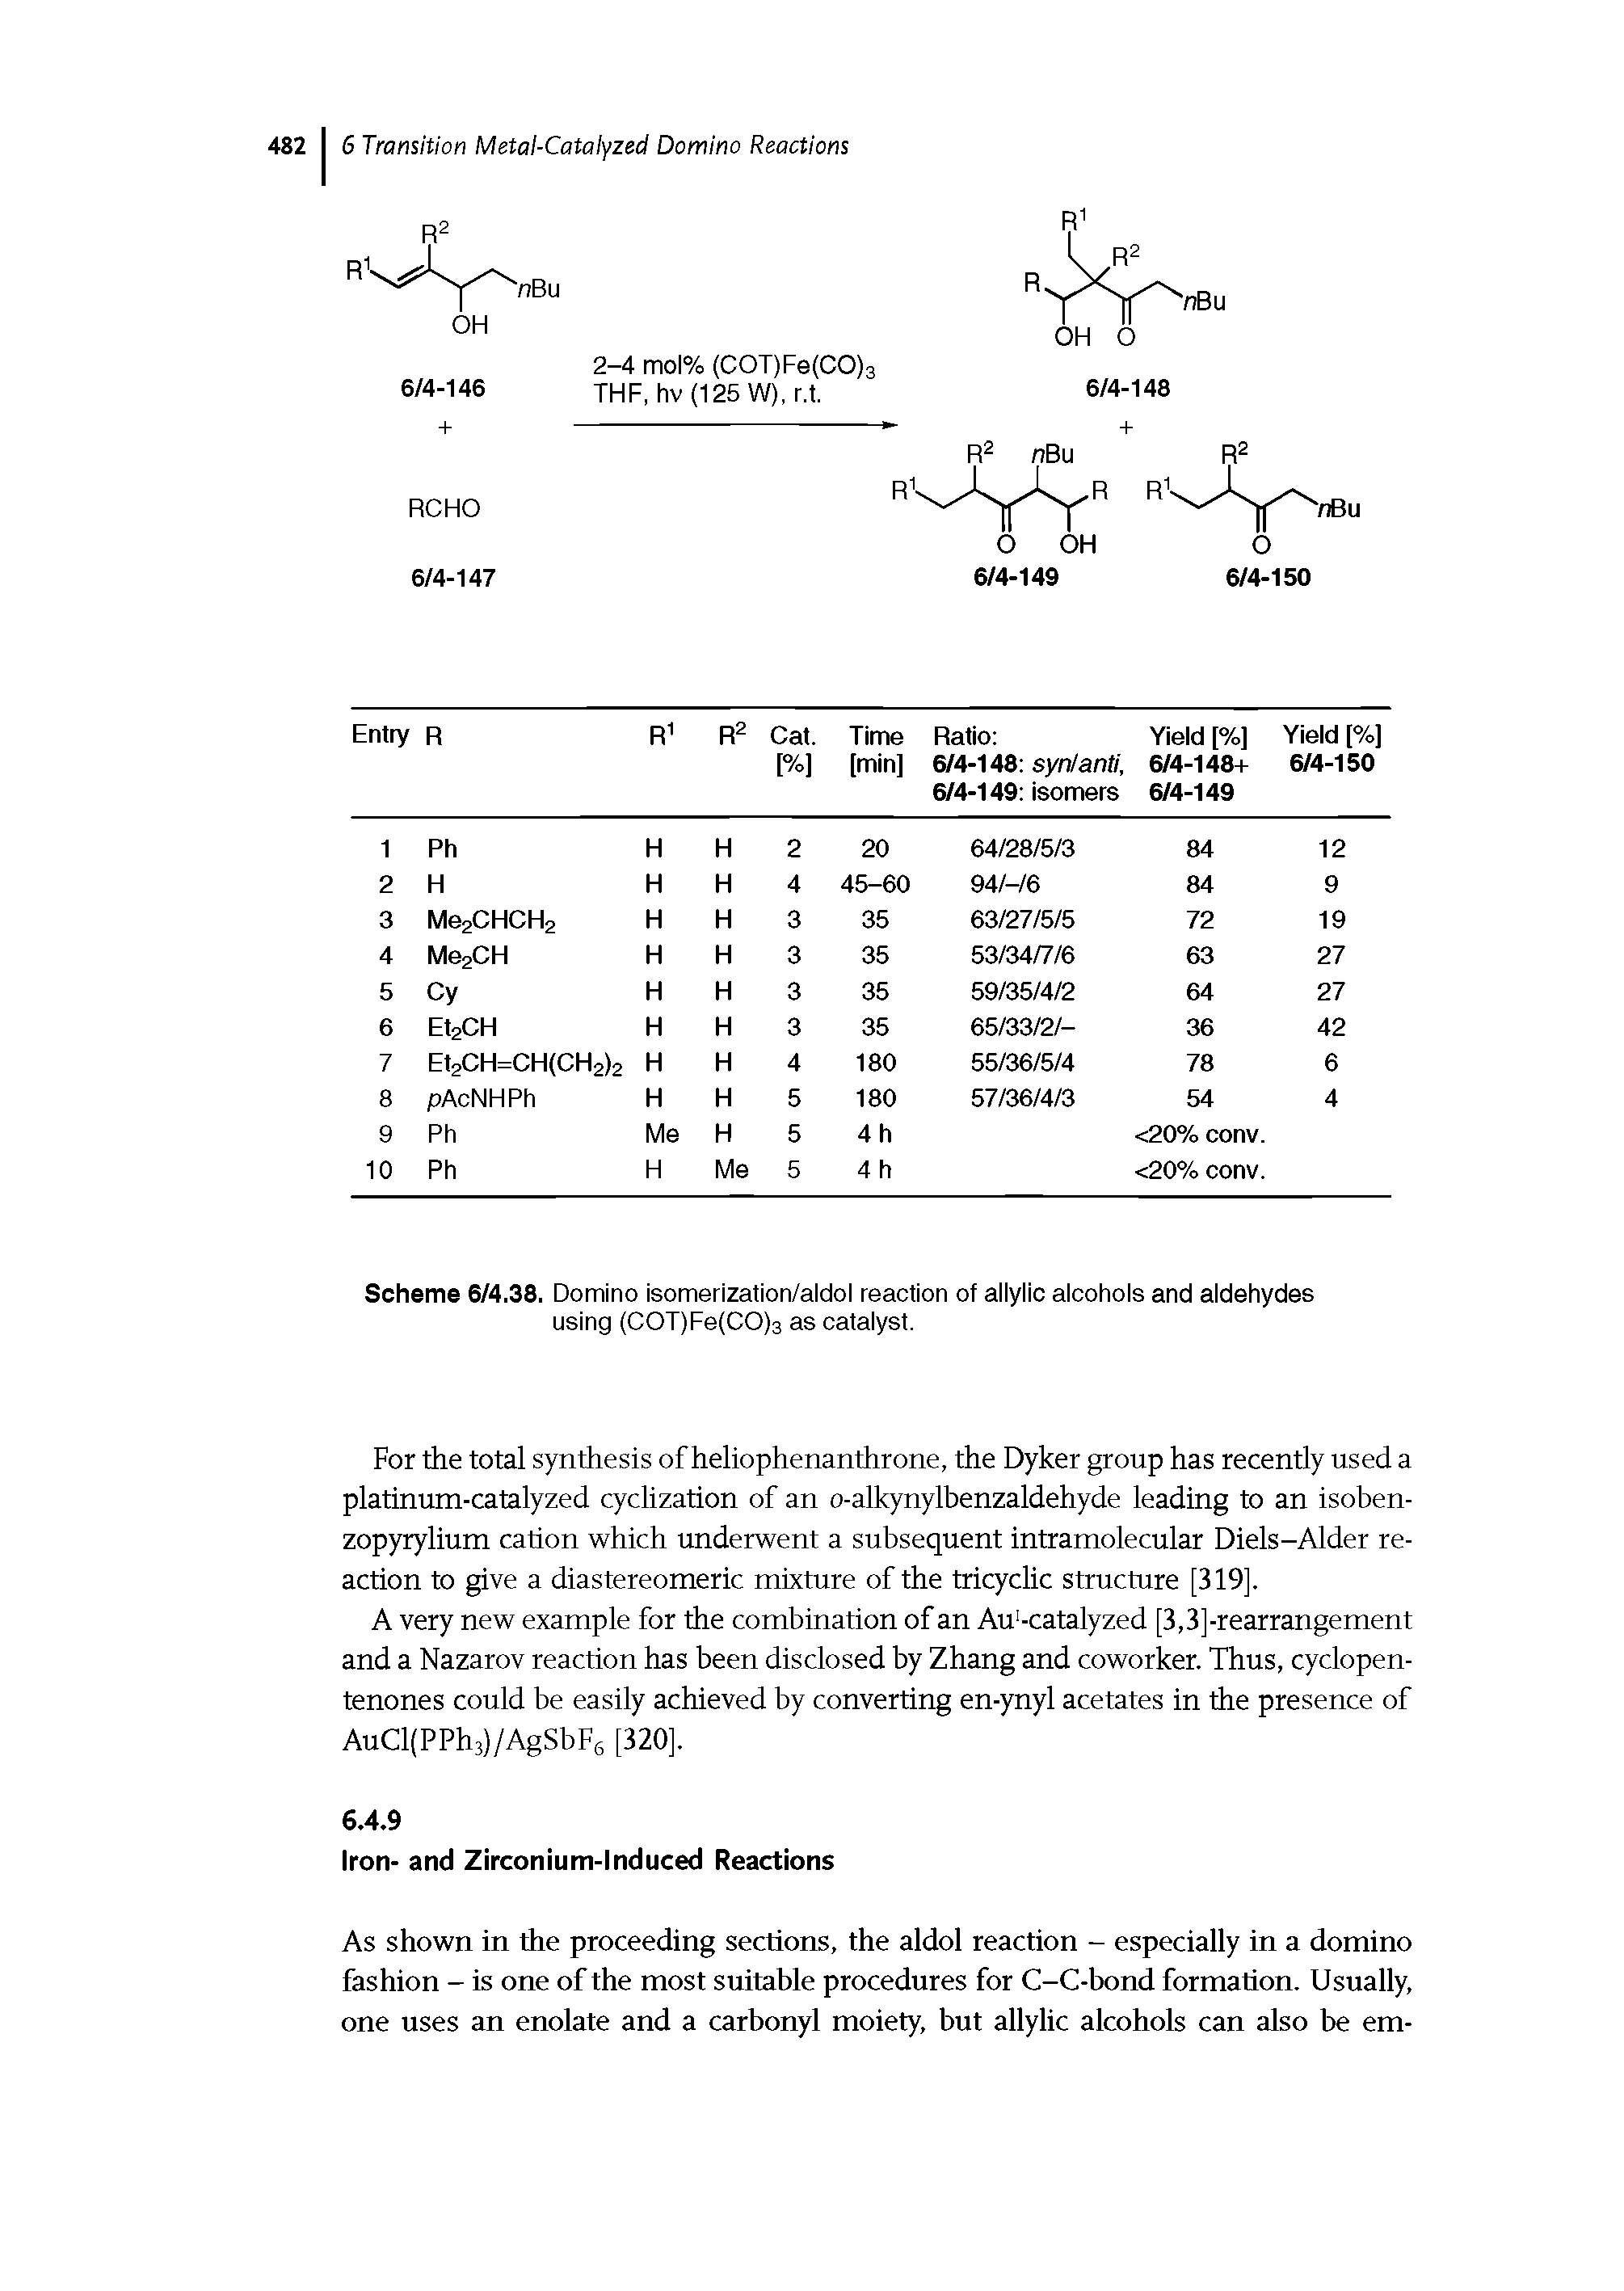 Scheme 6/4.38. Domino isomerization/aldol reaction of allylic alcohols and aldehydes using (COT)Fe(CO)3 as catalyst.